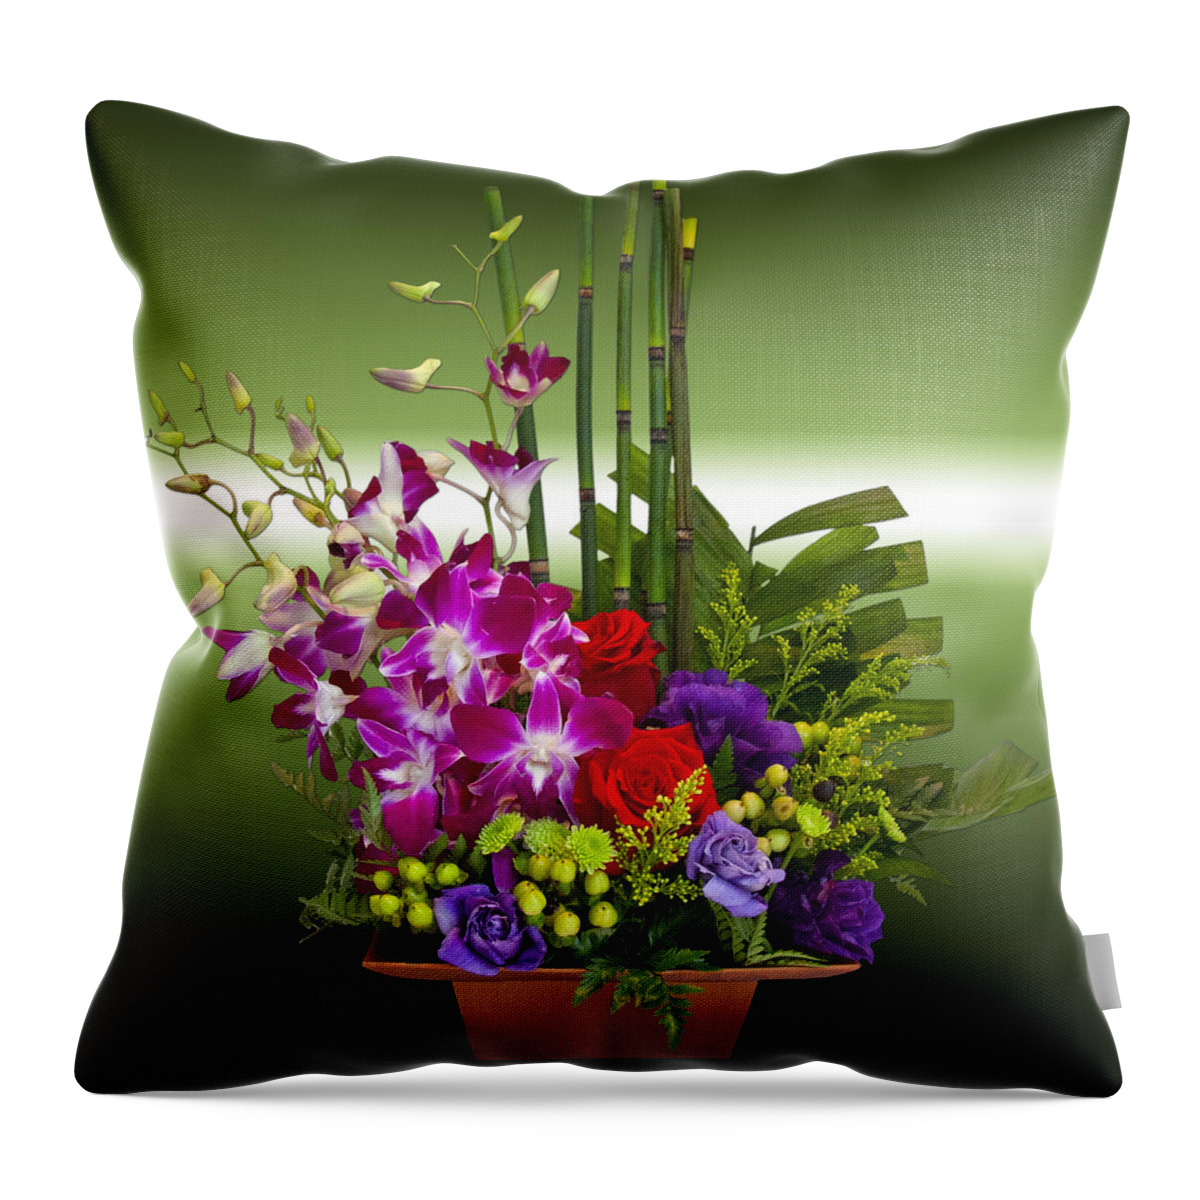 Flowers Throw Pillow featuring the photograph Floral Arrangement - Green by Chuck Staley